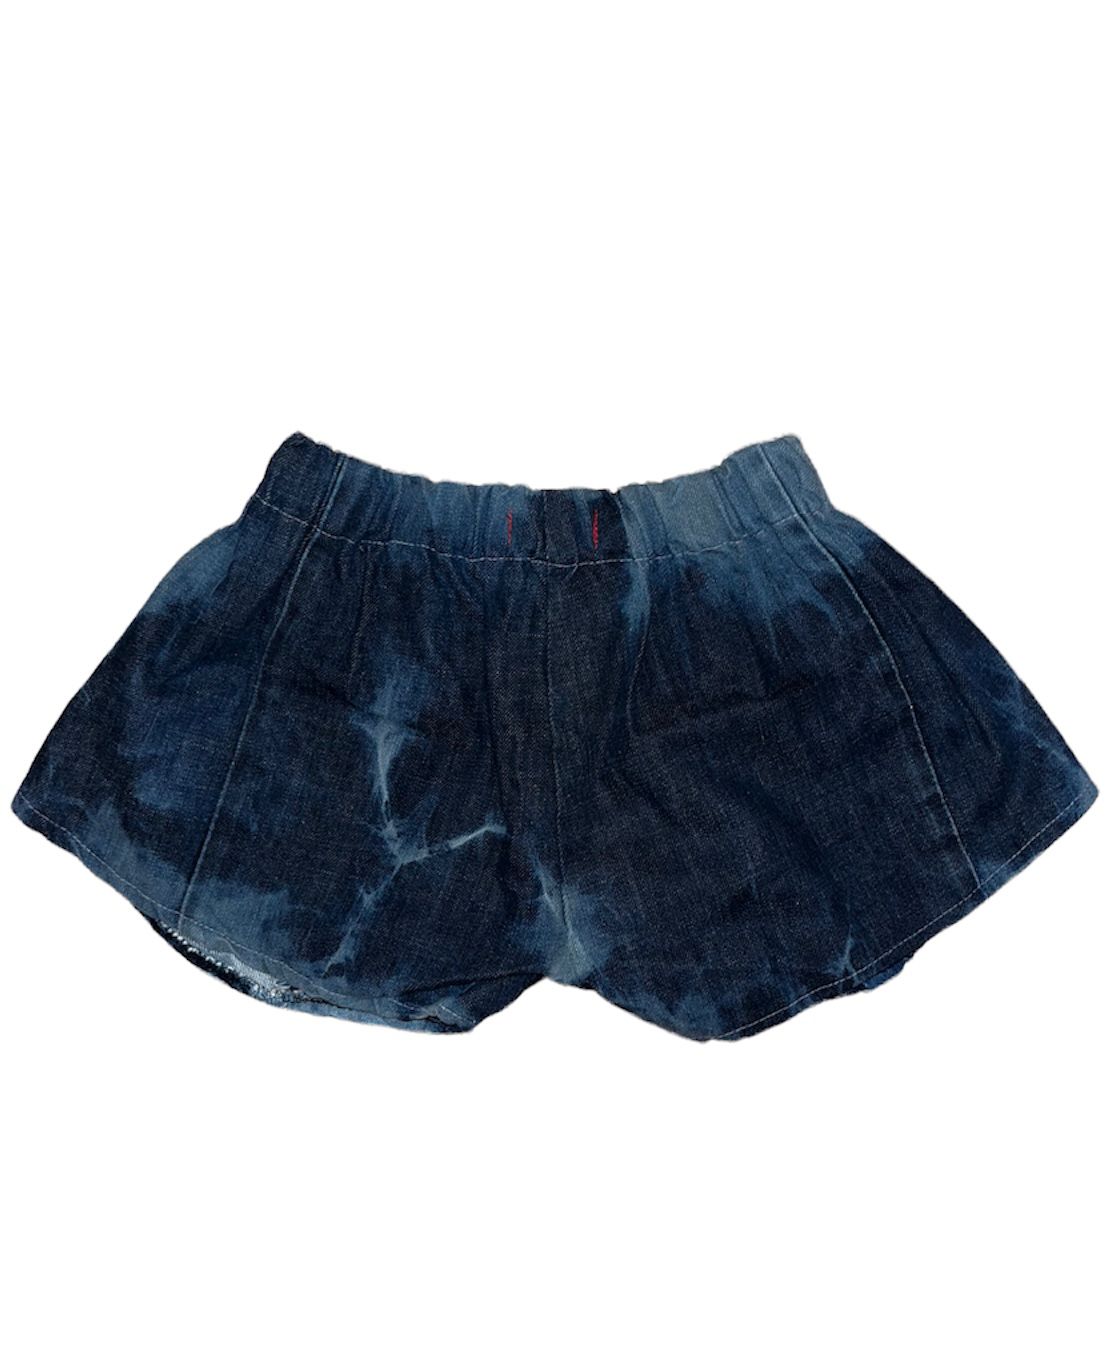 Handmade Jeans Shorts Ombre Dye Fashion Aftermath